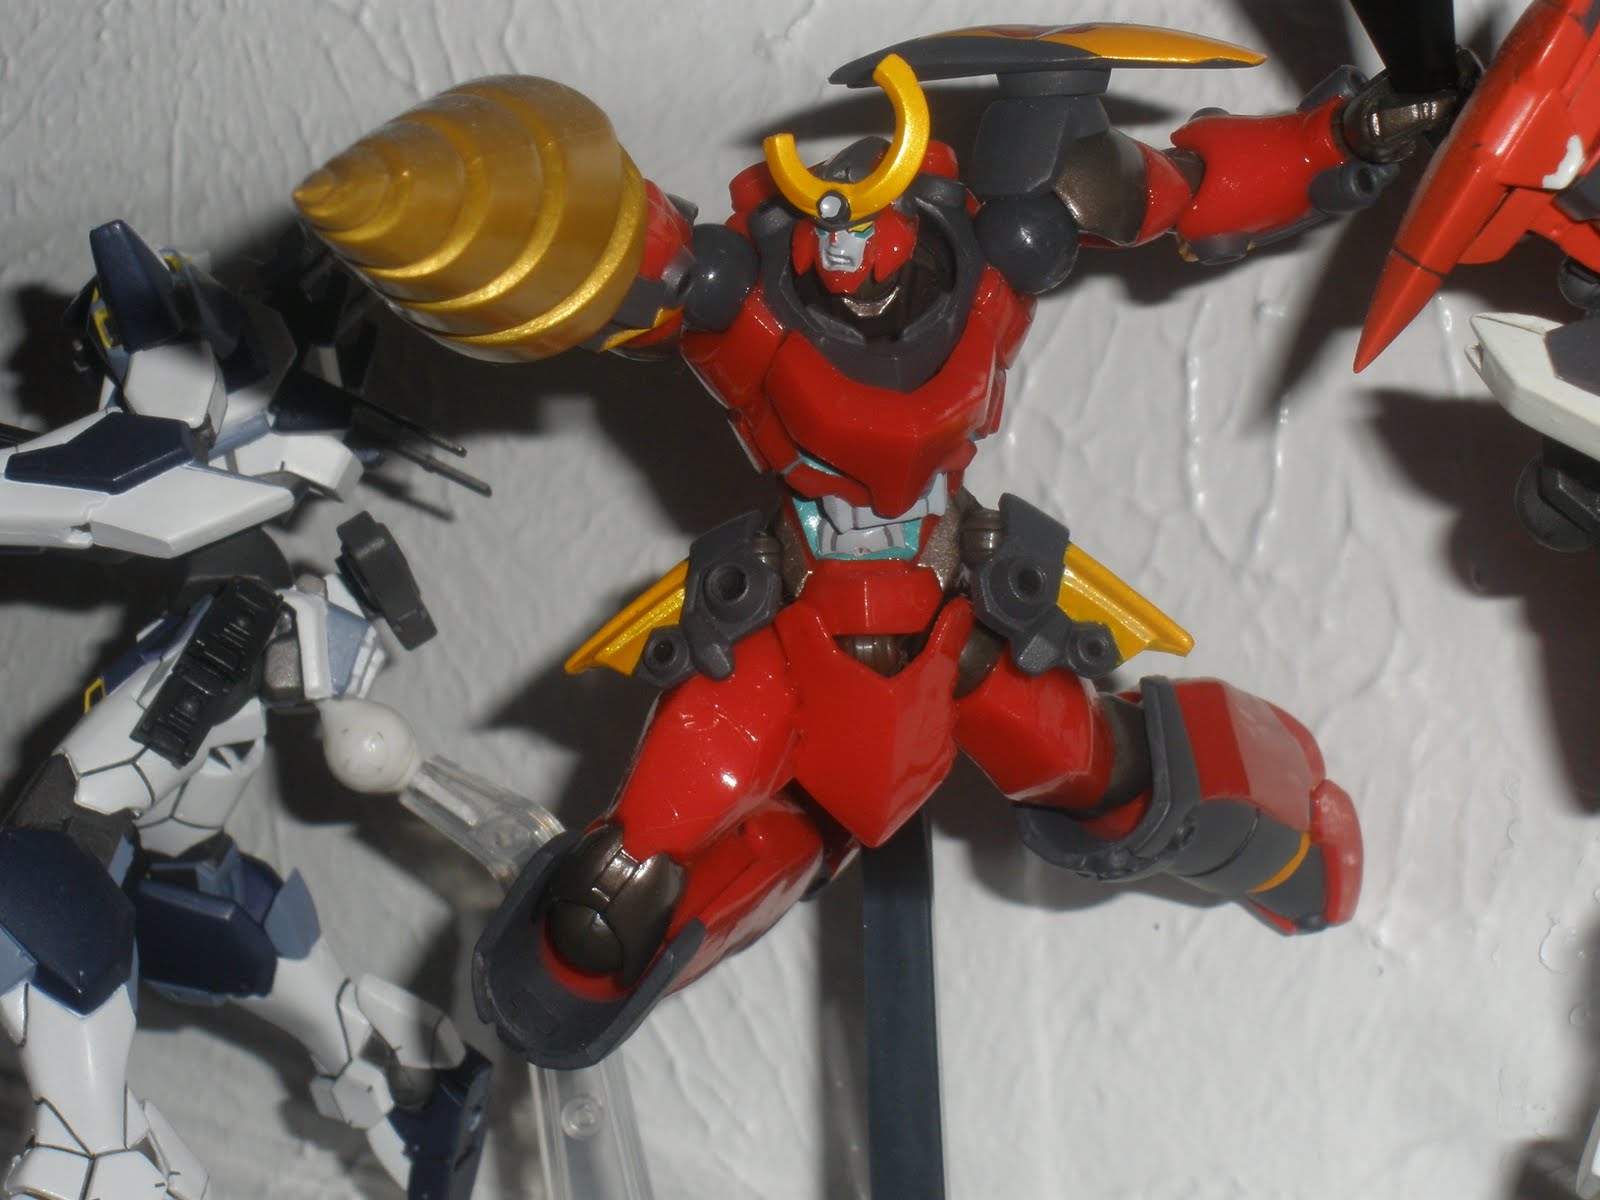 And such a shelf would not be complete without the gurren lagann. Now ...